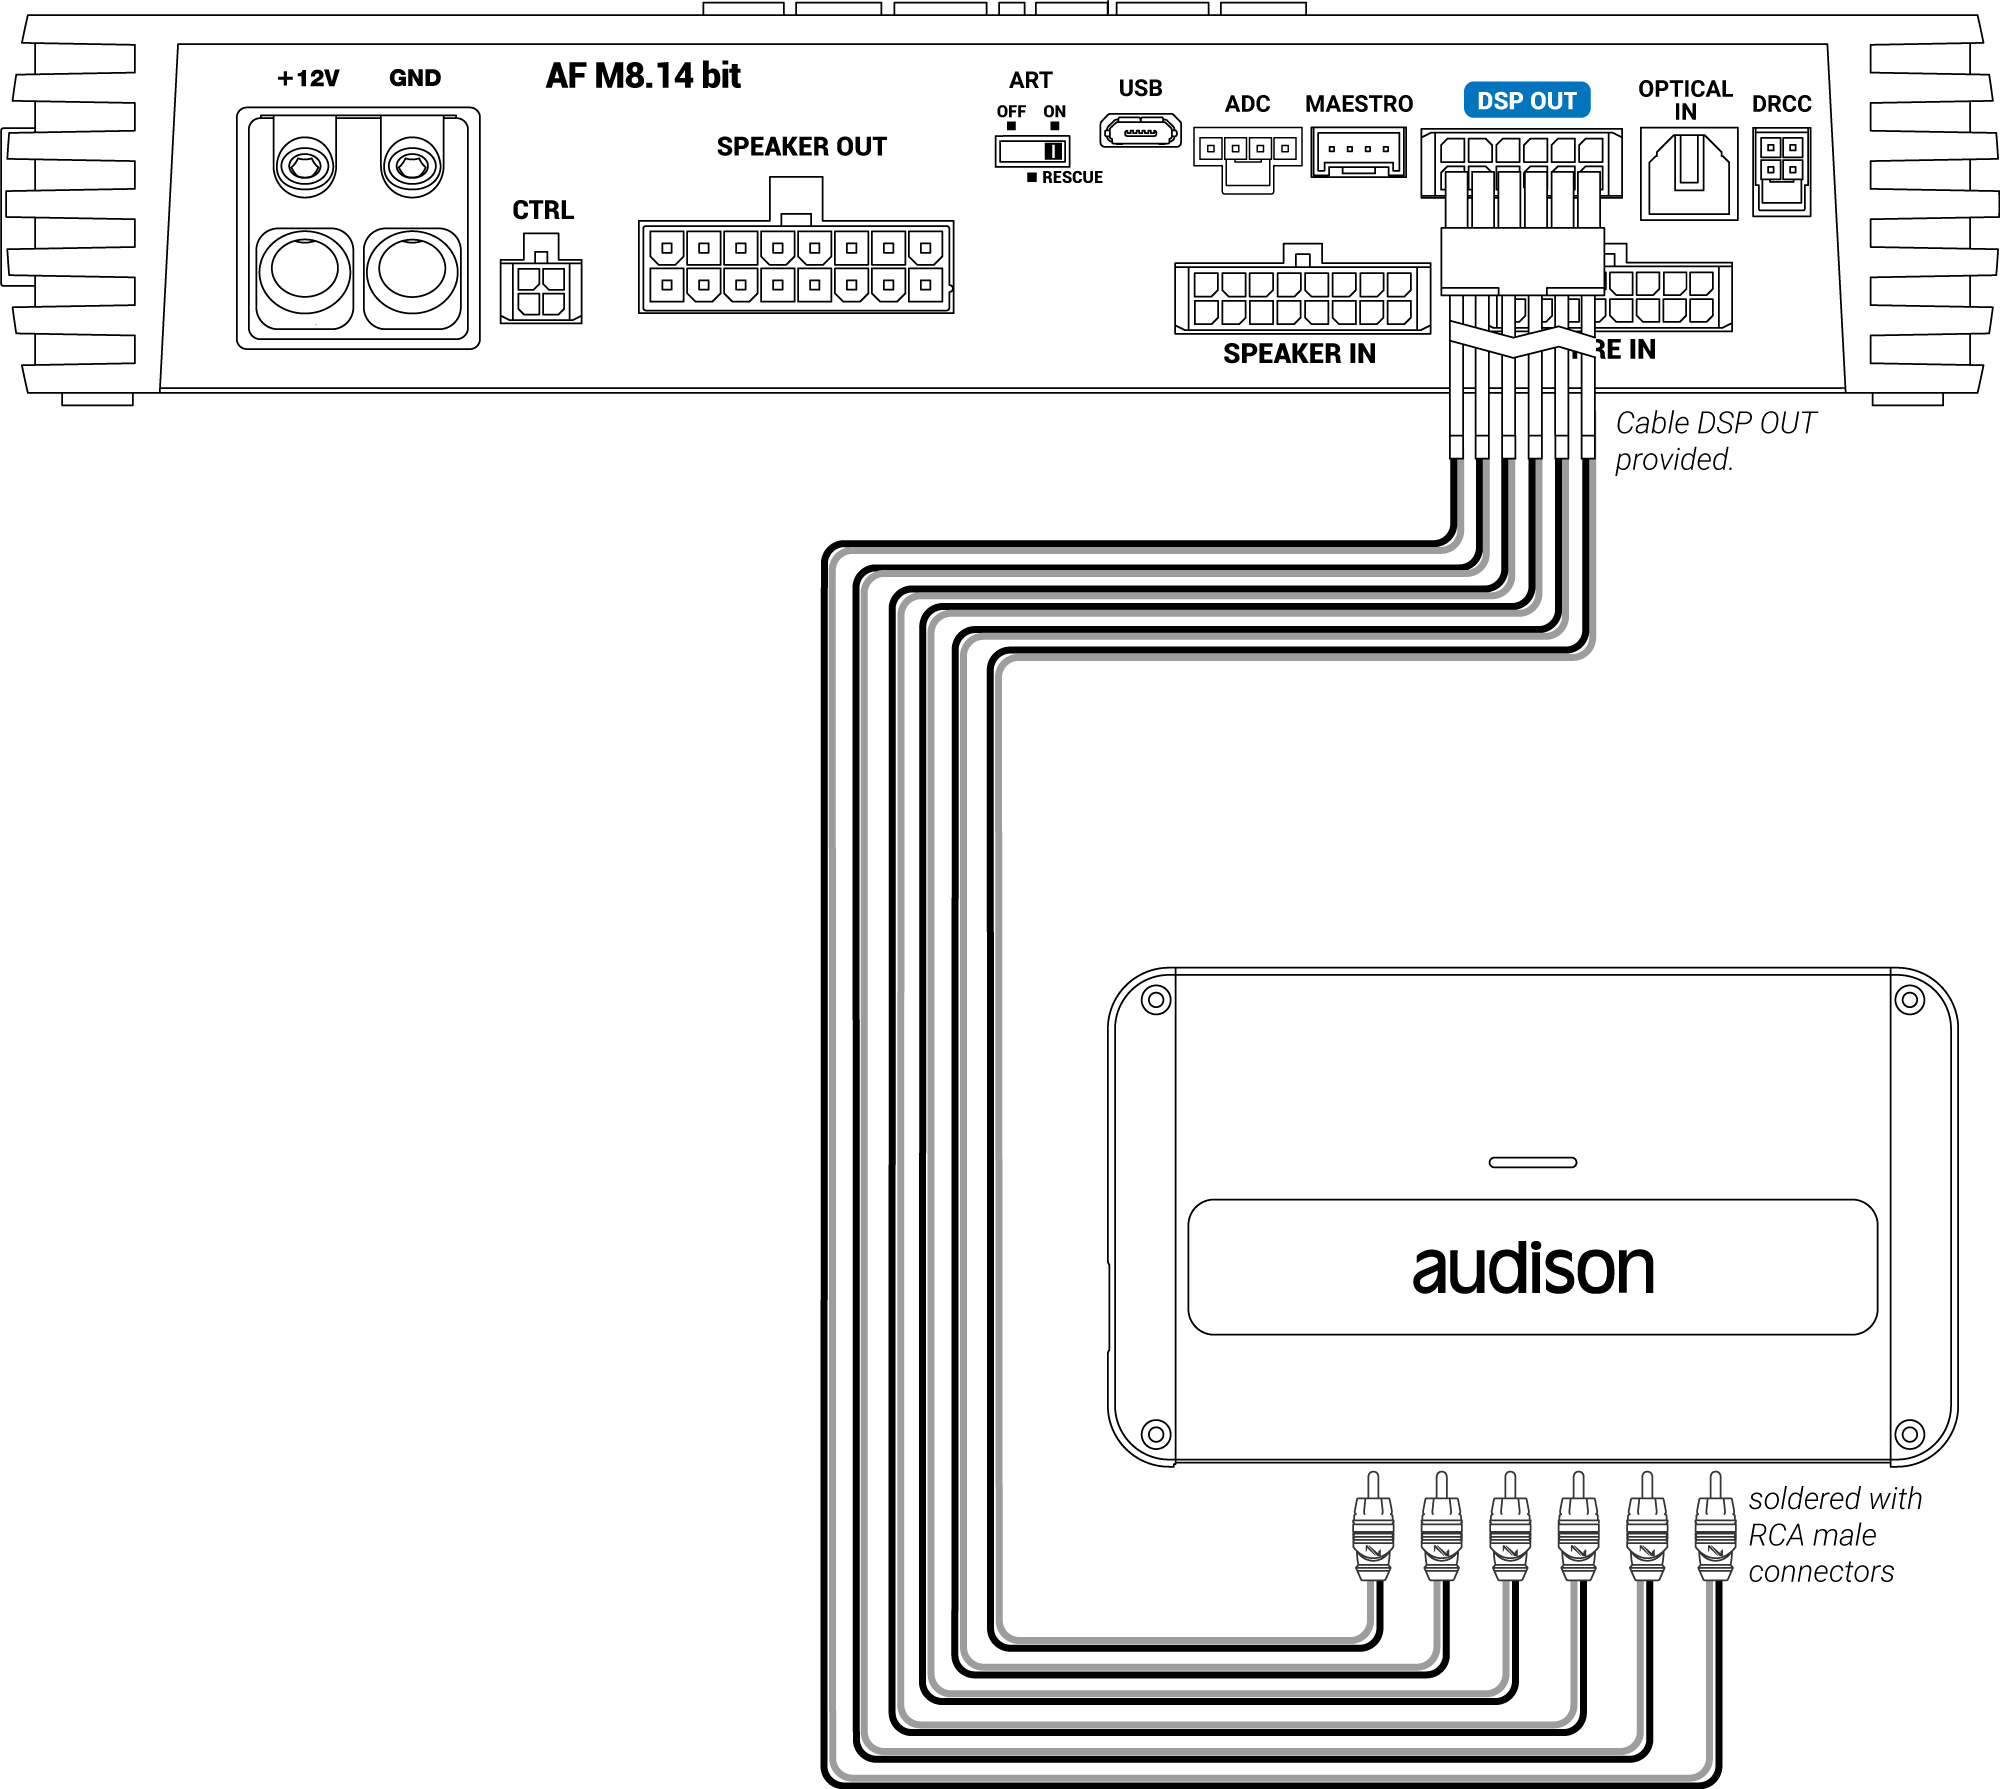 AFM8.14-bit_DSP-OUT_esempio-4_in.png